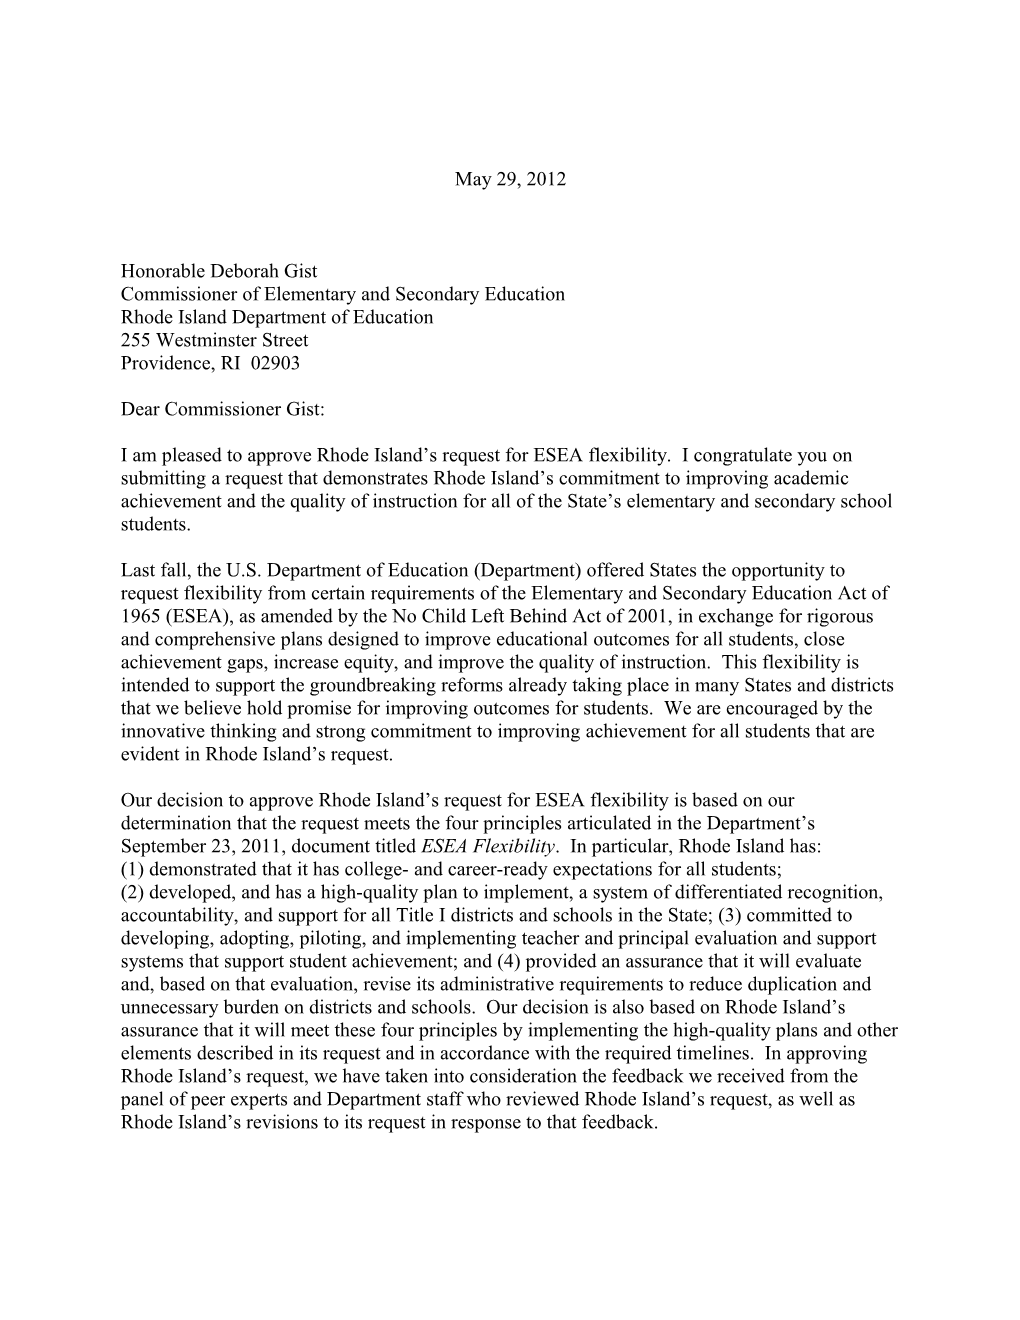 Rhode Island: ESEA Flexibility Requests, Secretary's Approval Letter May 29, 2012 (MS Word)